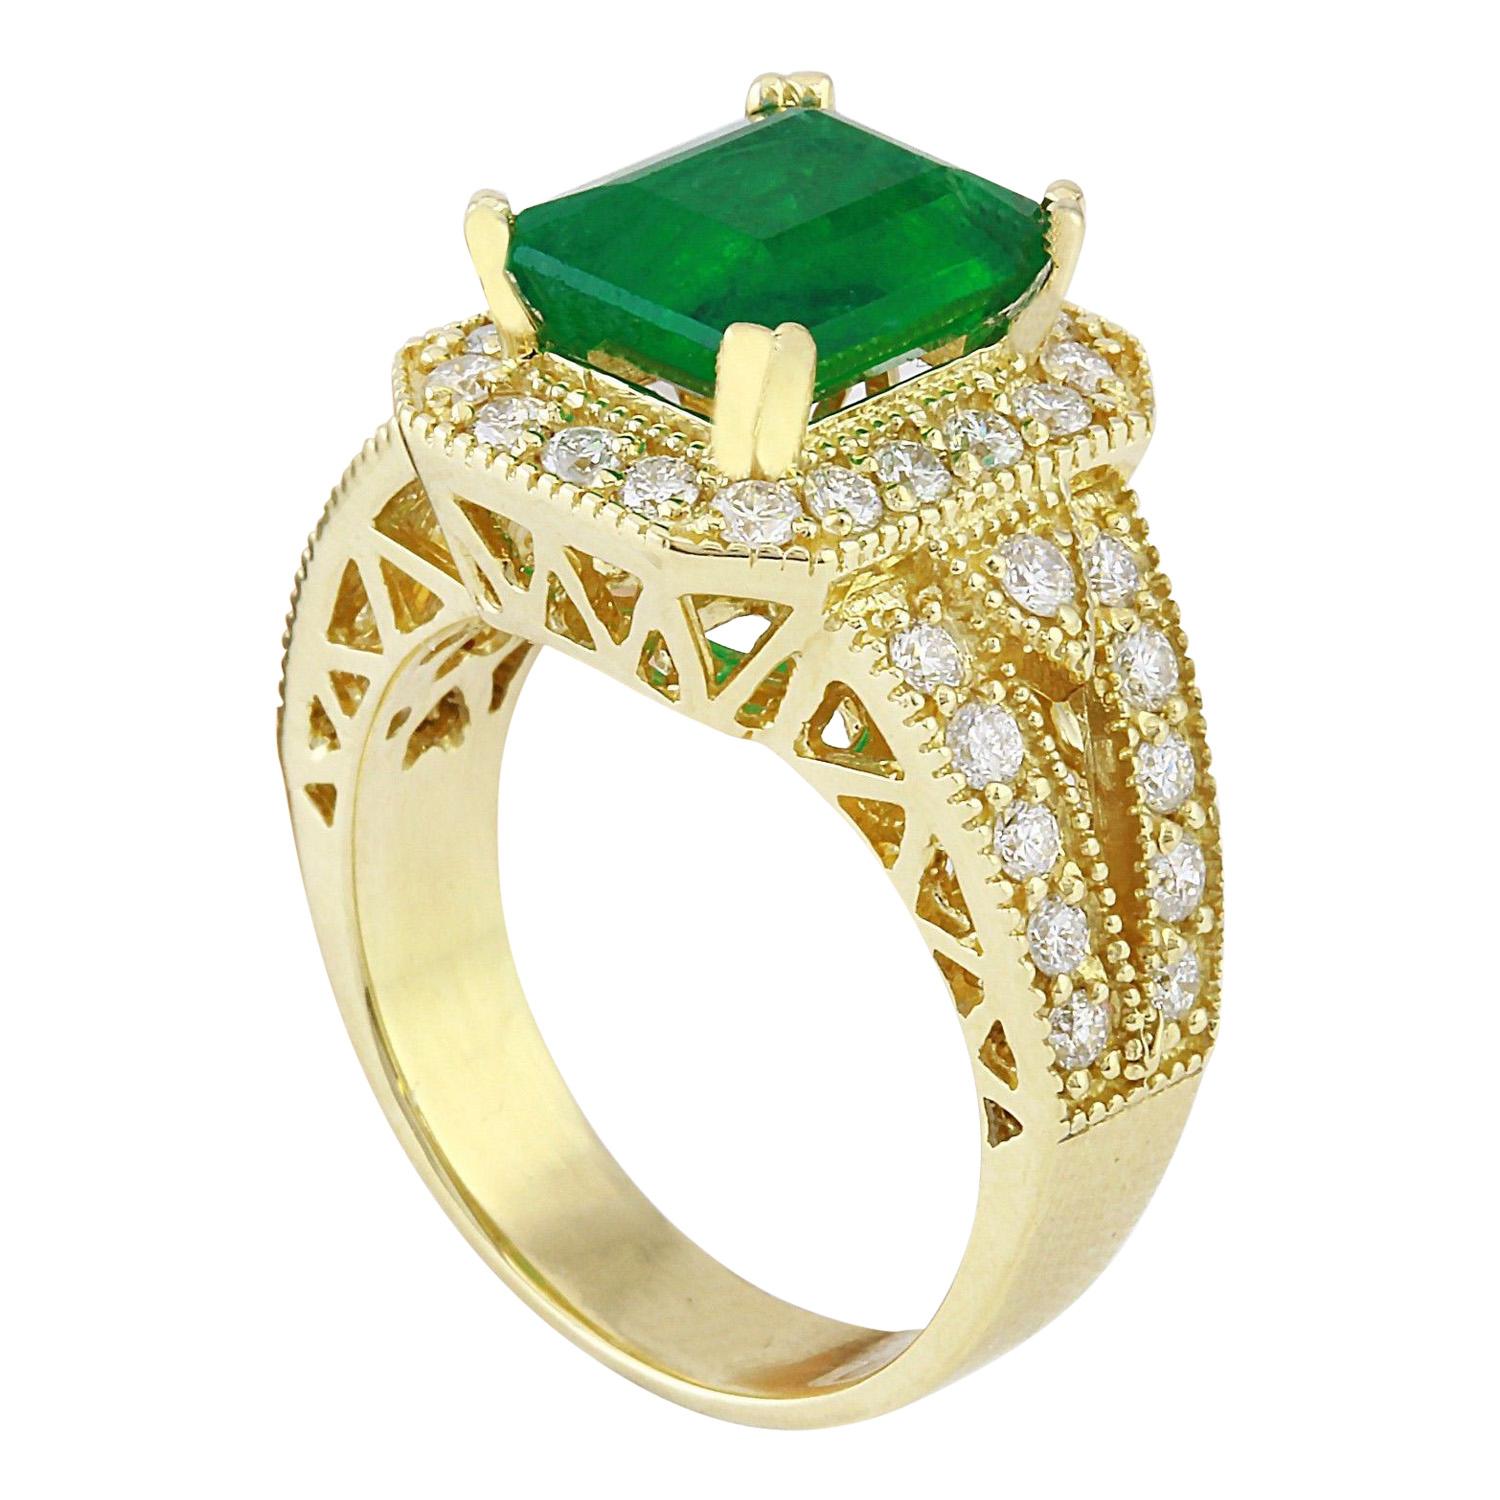 4.35 Carat Genuine Emerald 14K Solid Yellow Gold Diamond Ring In New Condition For Sale In Manhattan Beach, CA